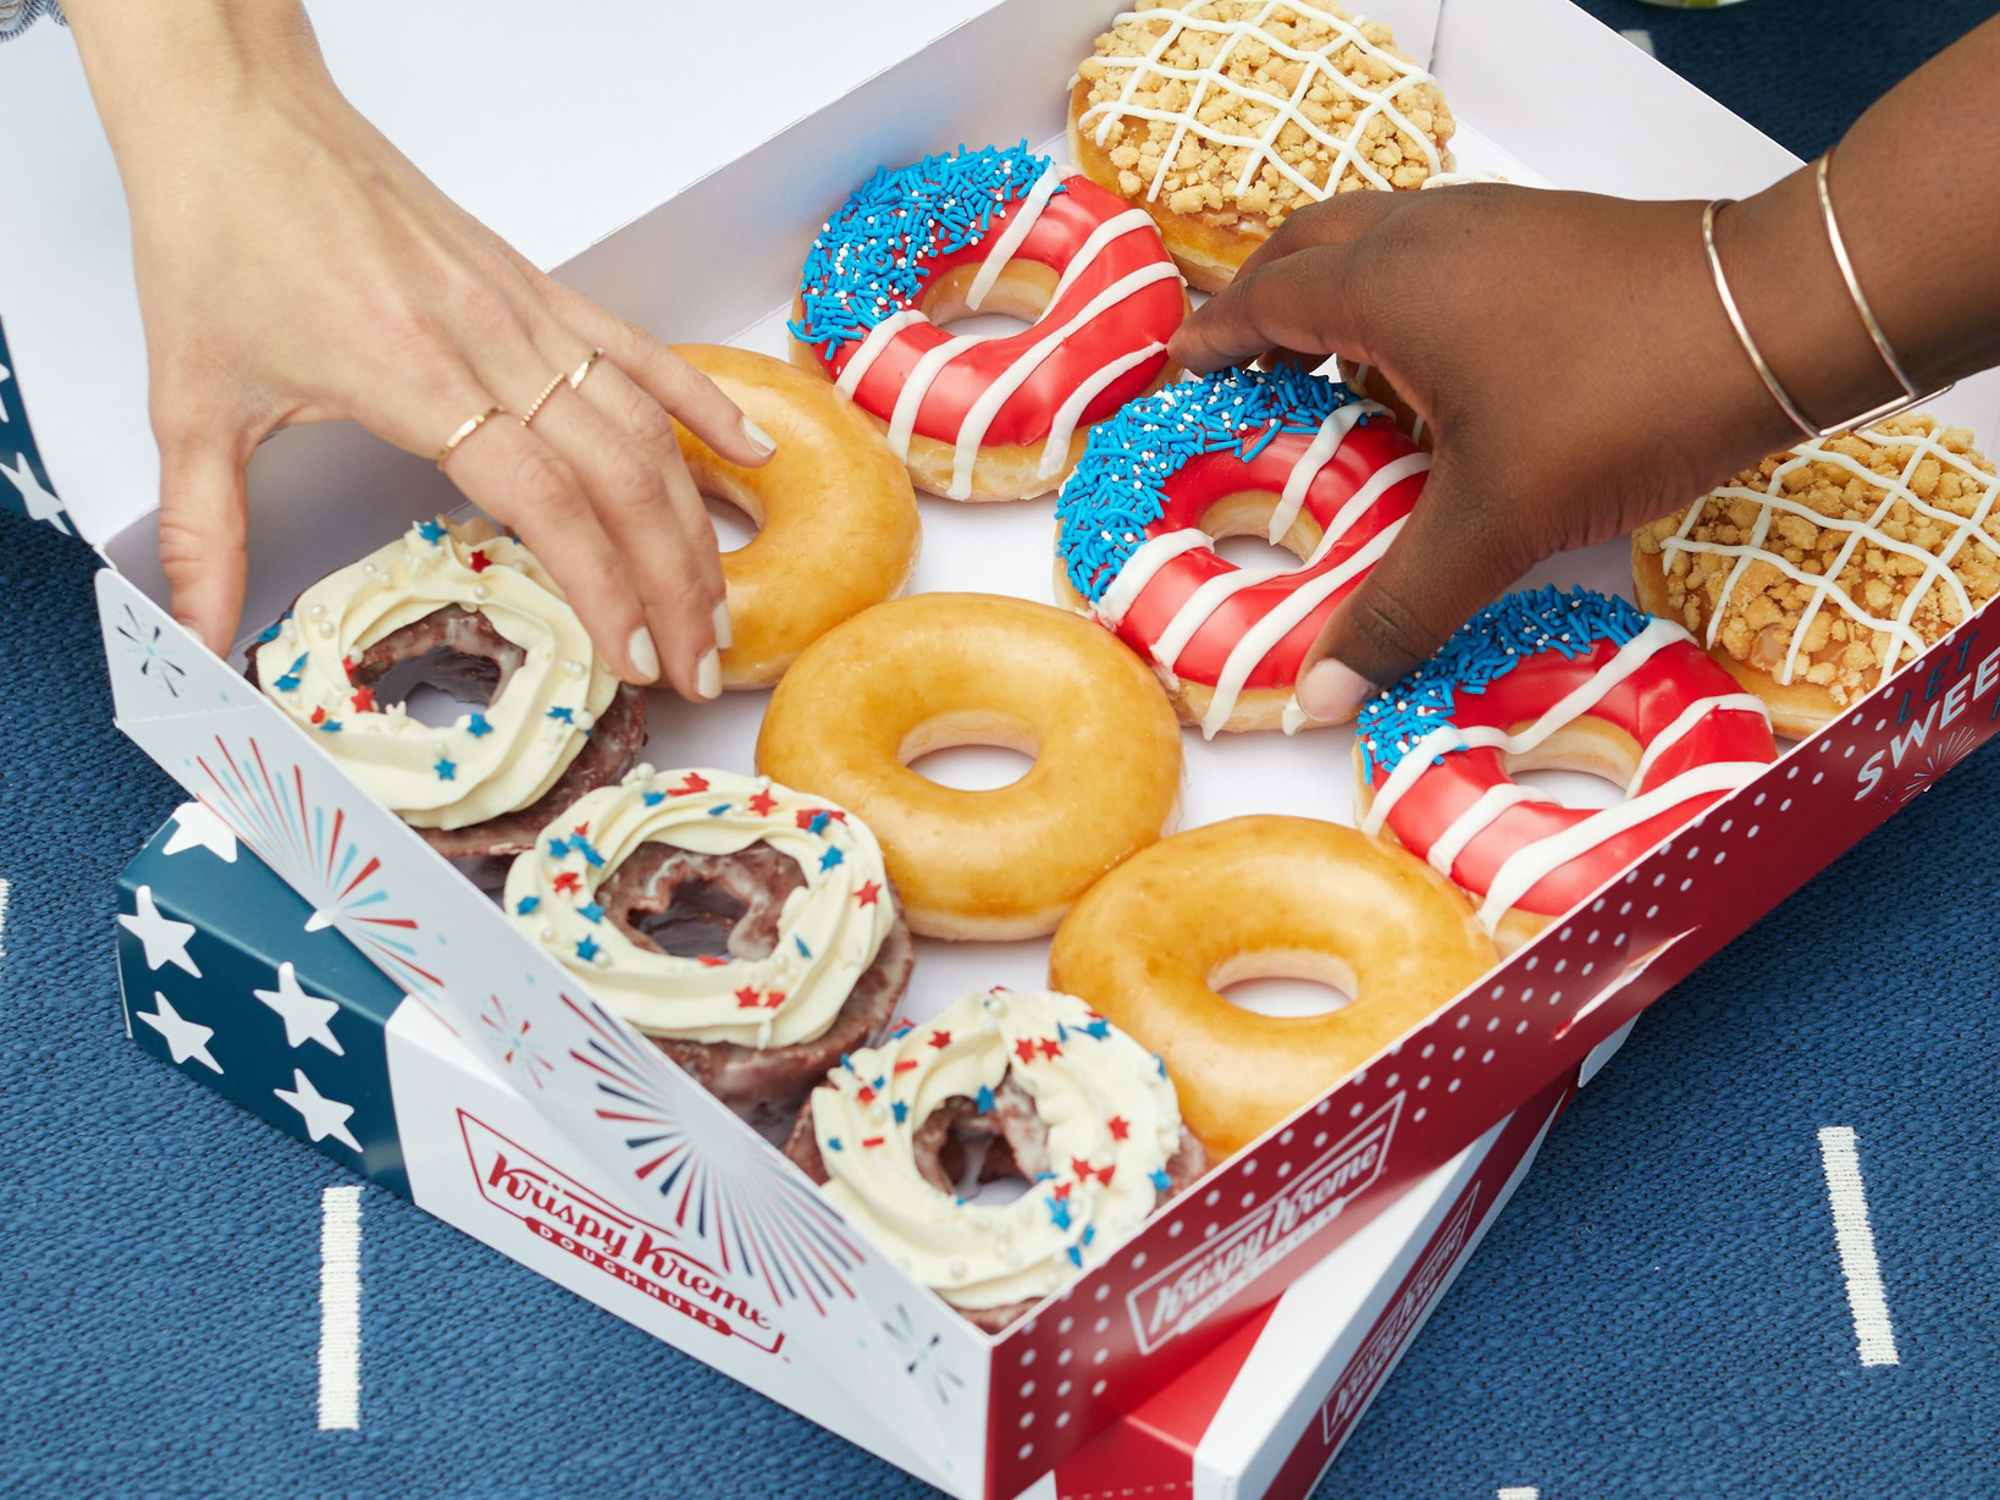 People reaching to take some Red, White, and Blue themed doughnuts from a Krispy Kreme box